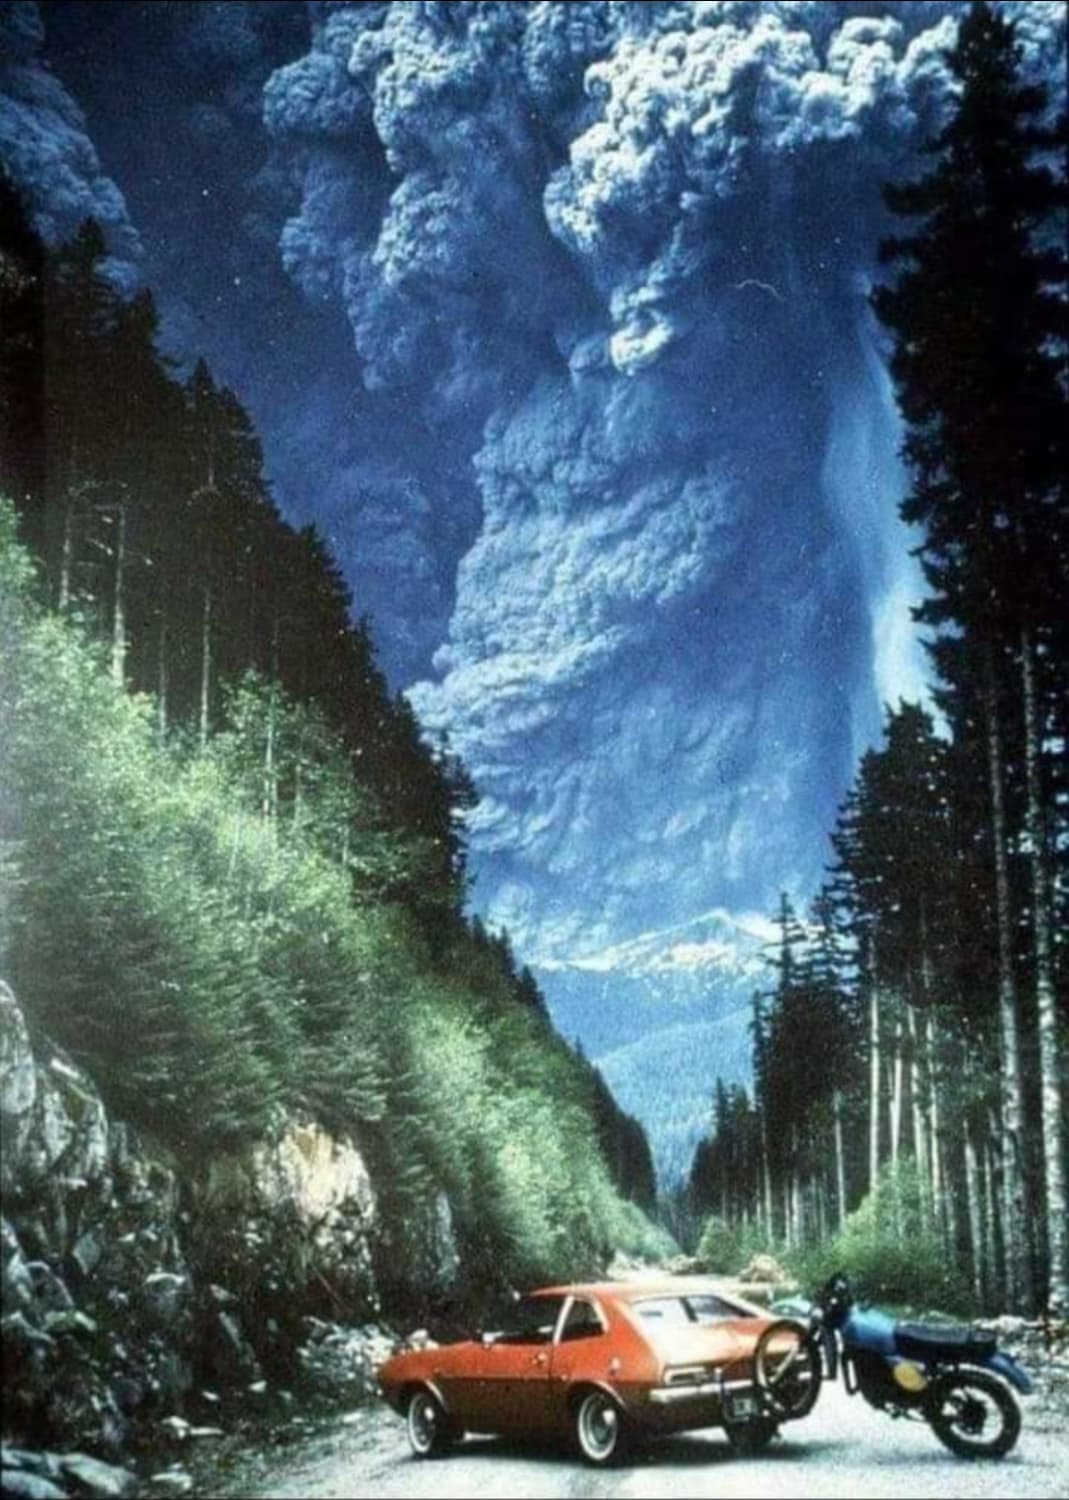 Today, 40 years ago, Mt St Helens exploded in Washington state. This picture was taken by Richard Lasher. He decided he'd take a look at the mountain once again before it blew, so he drove up to see the mountain. While driving, the mountain exploded. He jumped out of the car and snapped this photo.